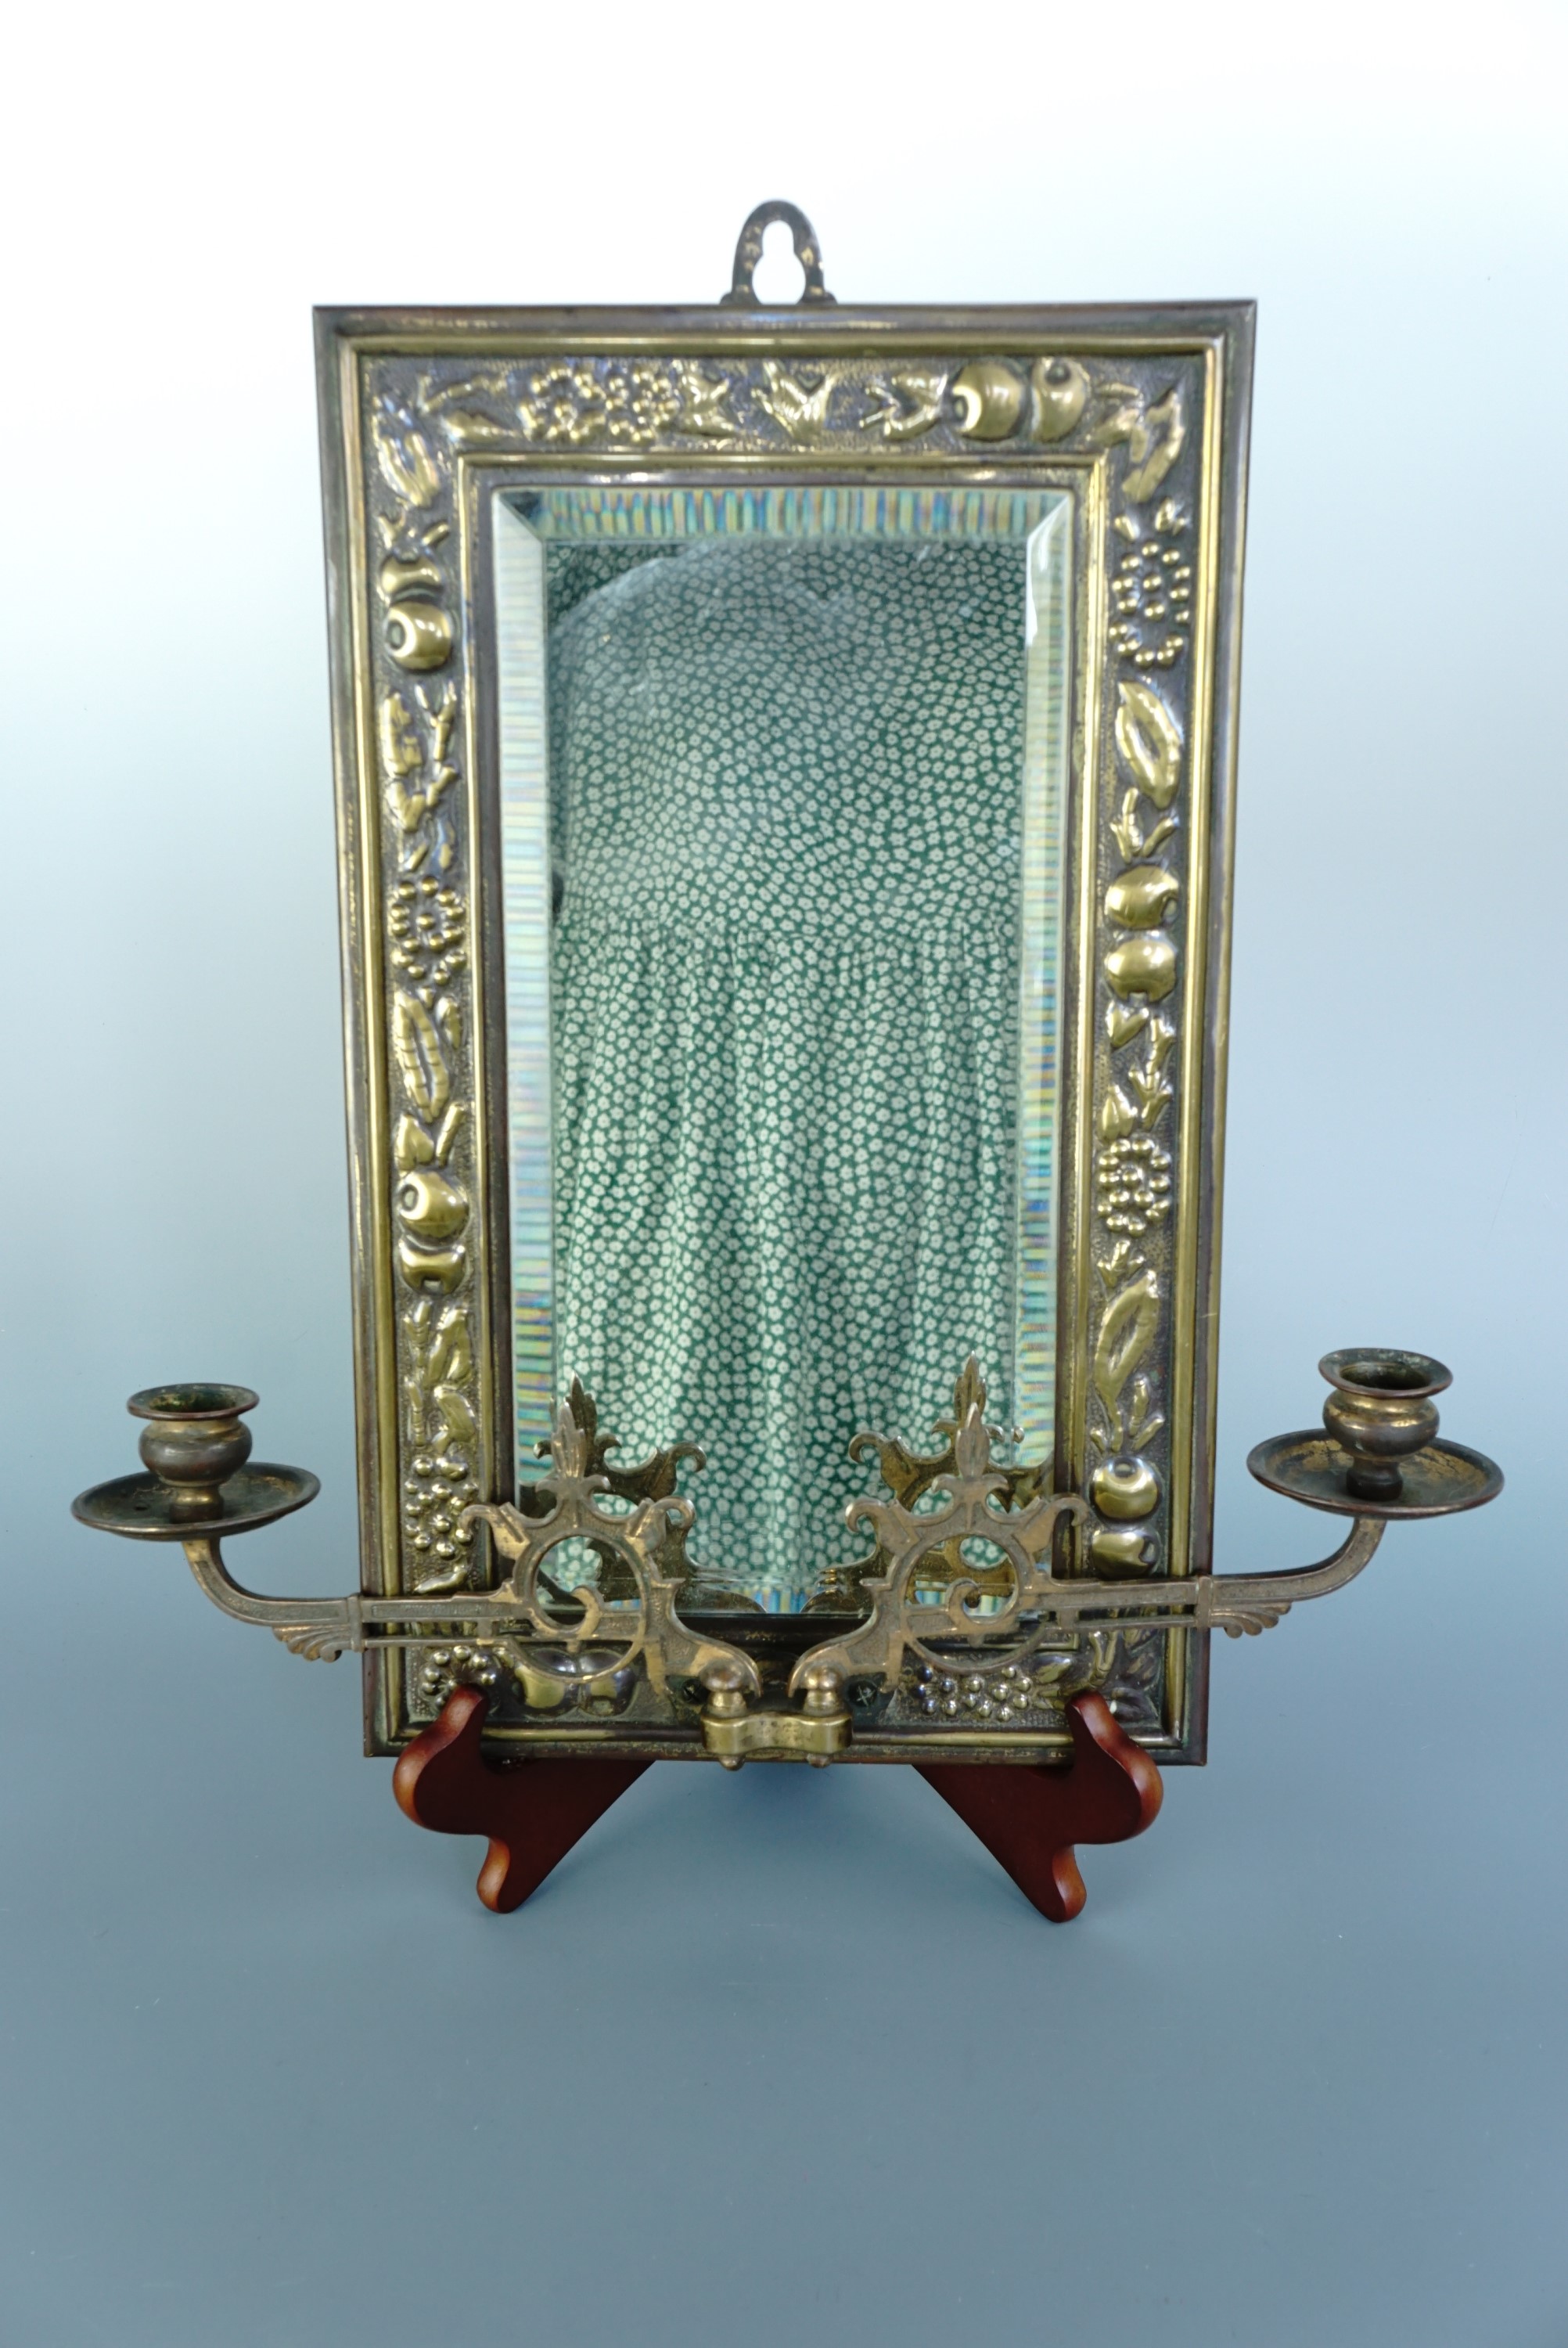 An antique brass framed two-branch candle sconce, bearing repousse decoration in the form of fruit